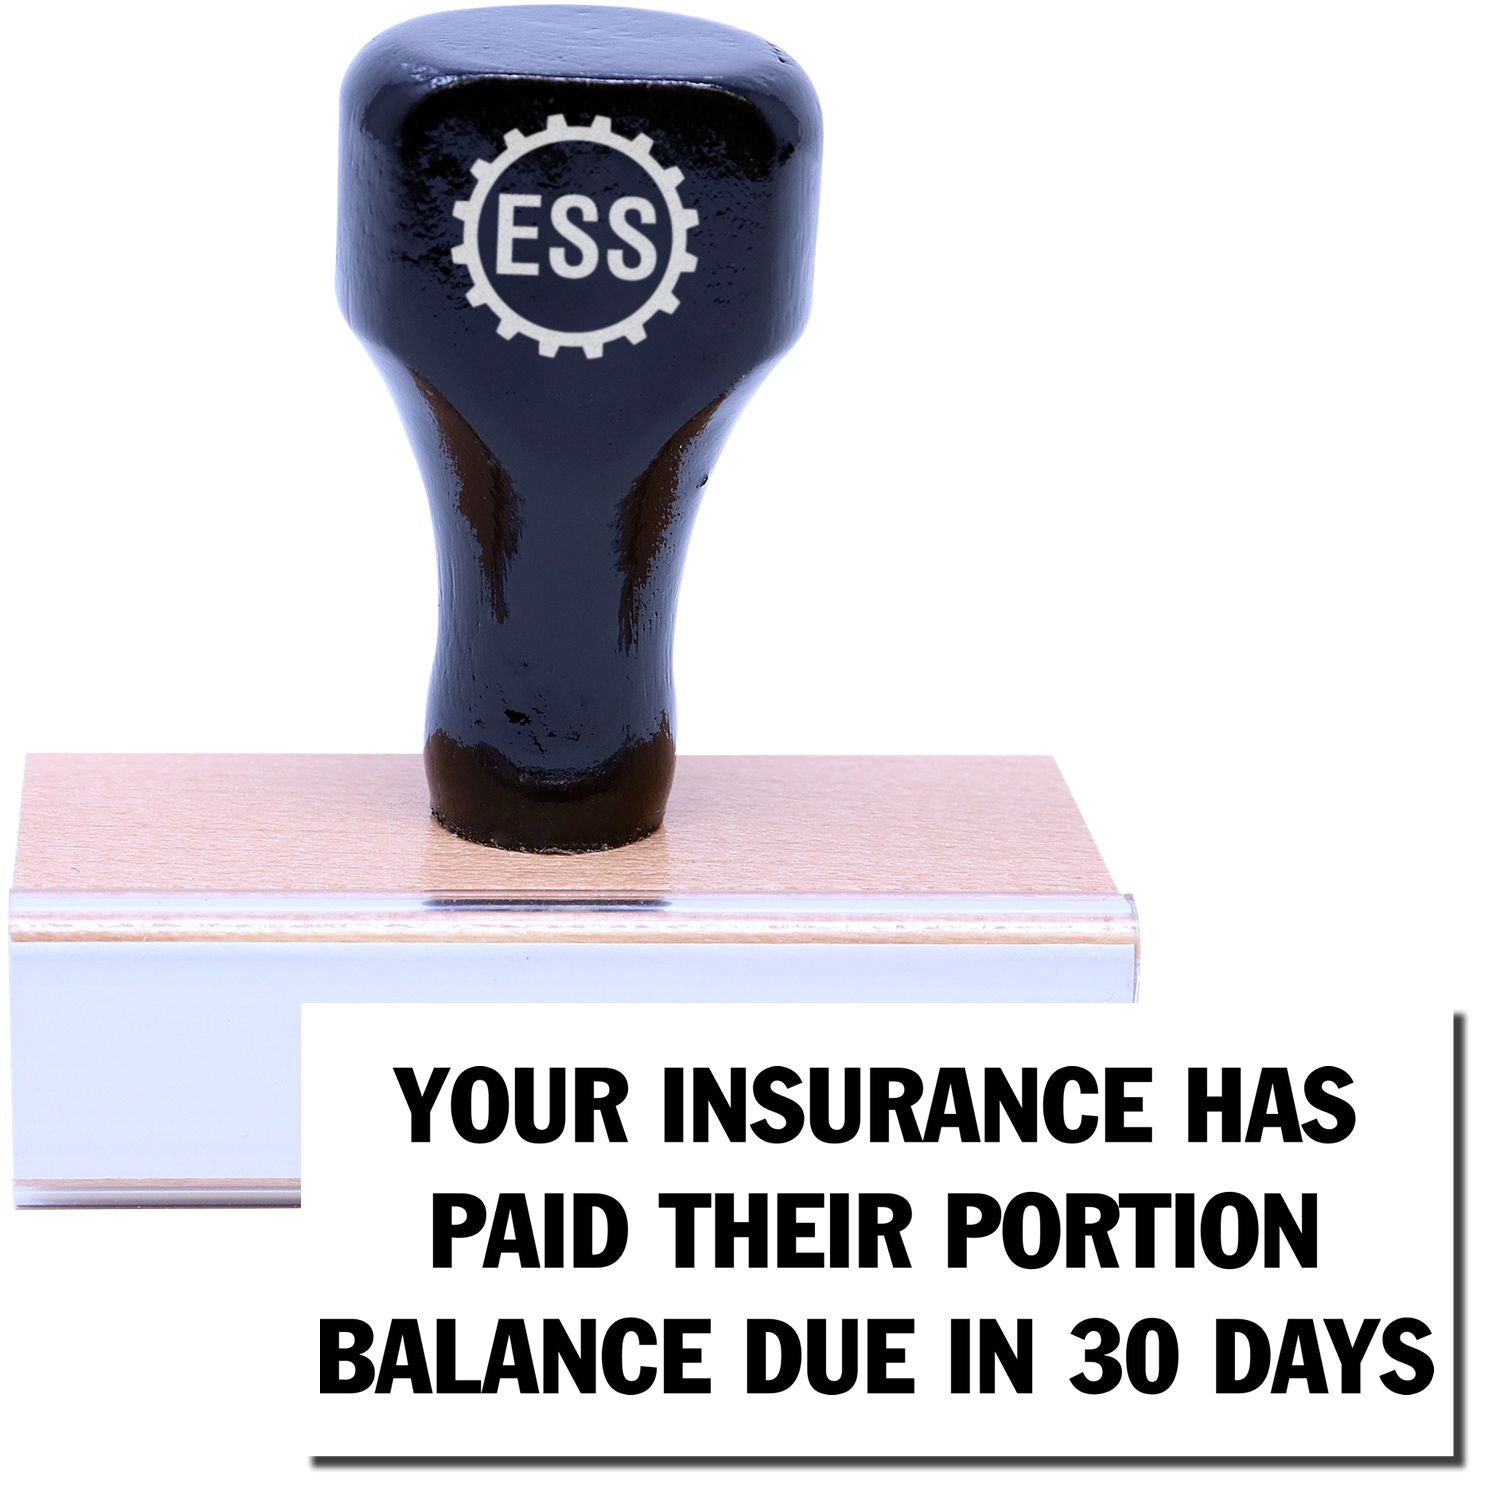 A stock office rubber stamp with a stamped image showing how the text "YOUR INSURANCE HAS PAID THEIR PORTION" and "BALANCE DUE IN 30 DAYS" in a large font is displayed after stamping.